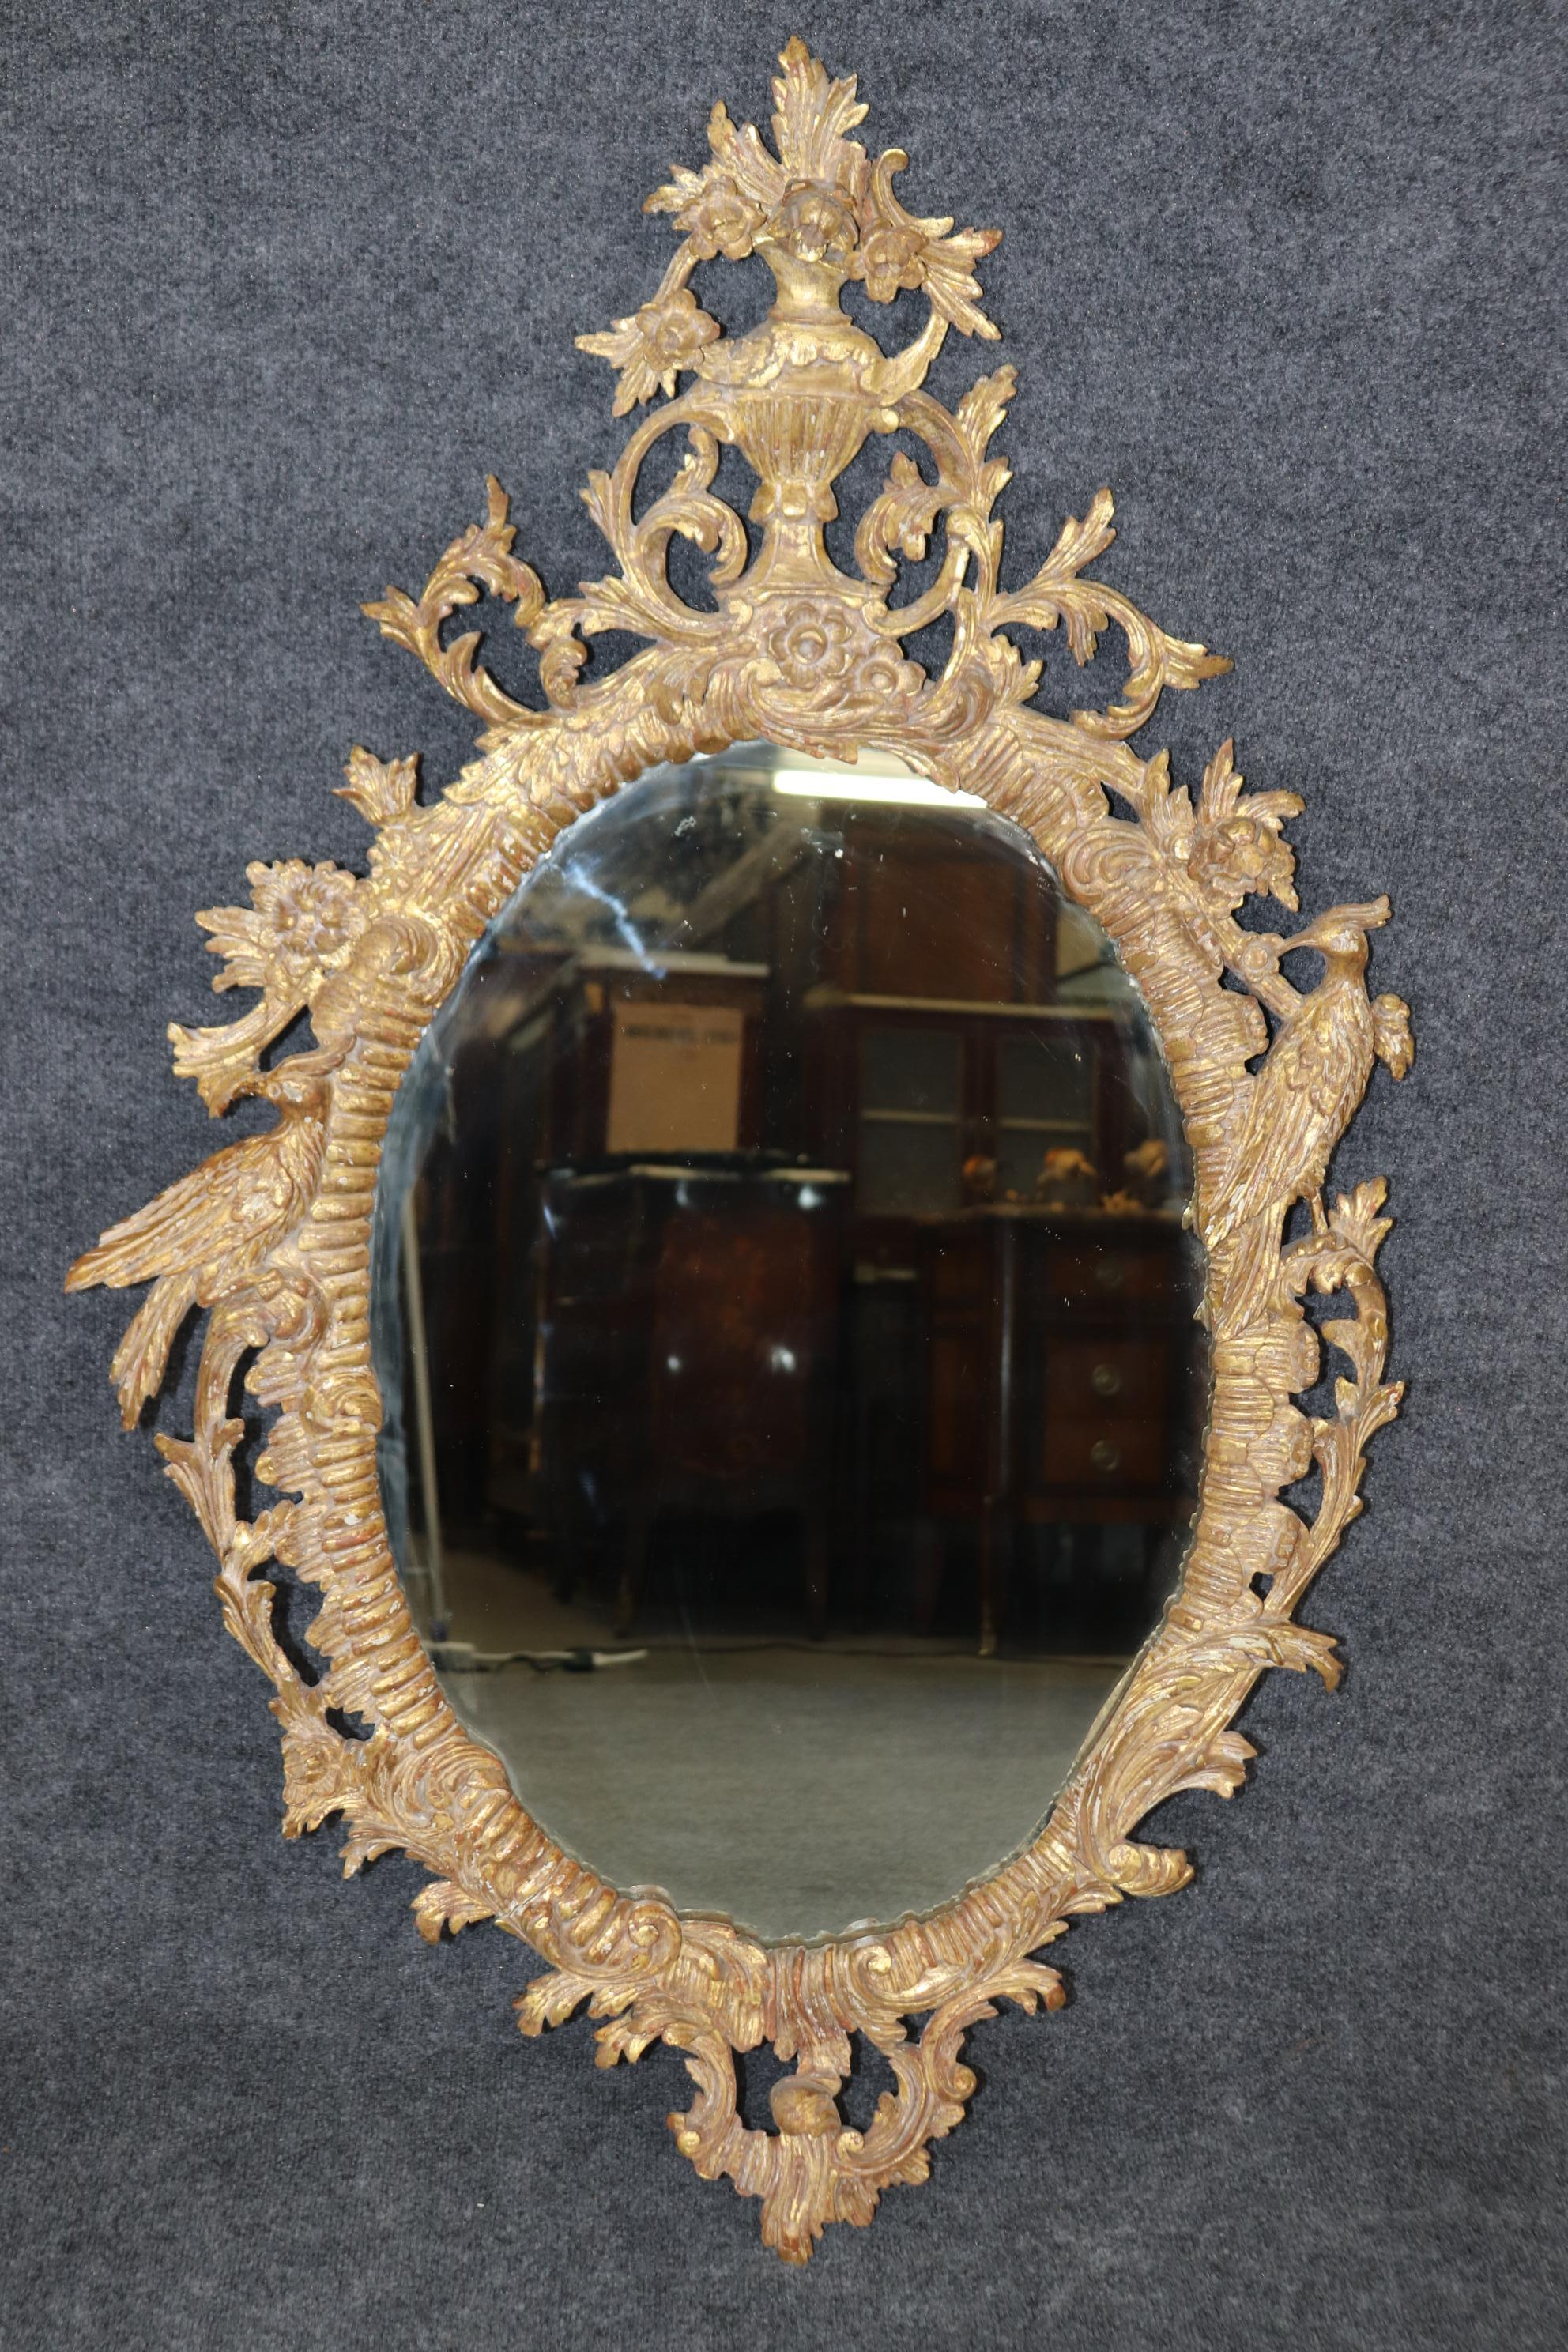 This is a gorgeous pair of antique English carved wall mirrors with carved birds and a great antique distressed gilt wood finish. They are decadent and of superb quality. Measures 49 tall x 29.75 wide x 4.5 deep. Dates to the 1910-20s era. 